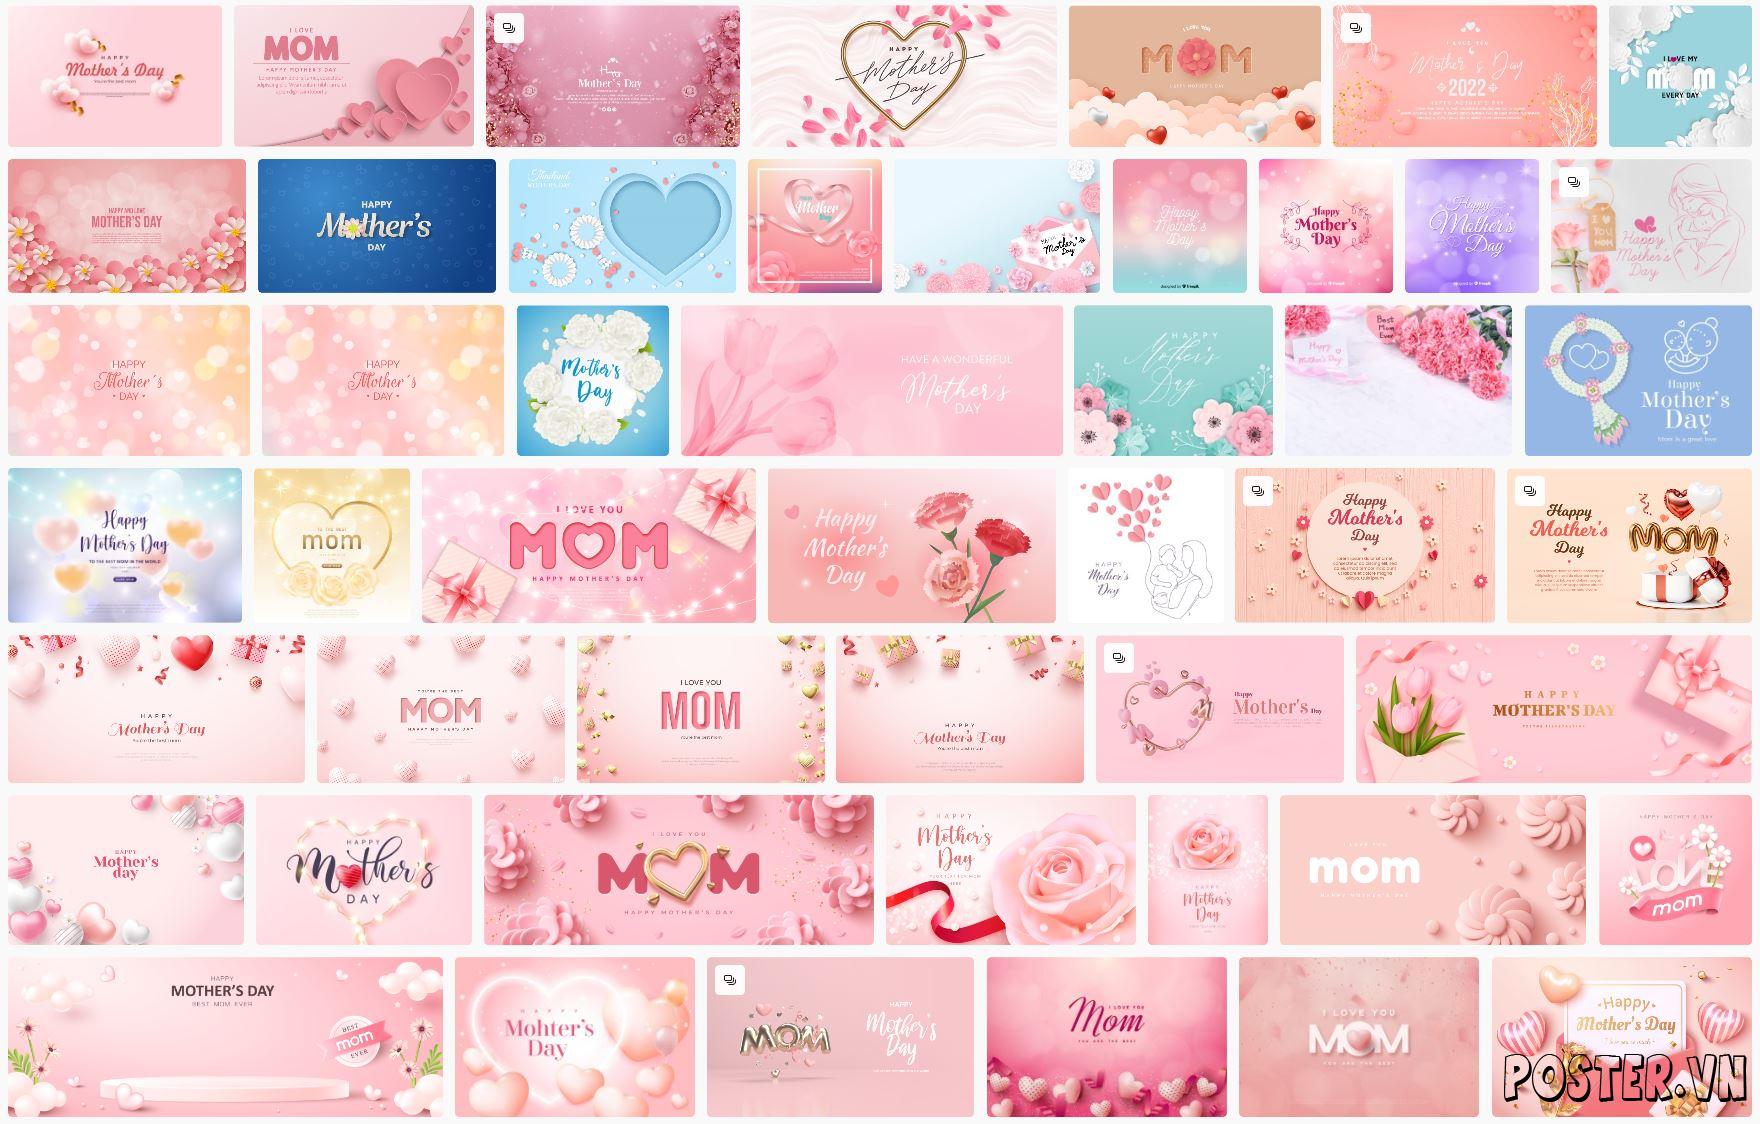 Happy mother’s day background